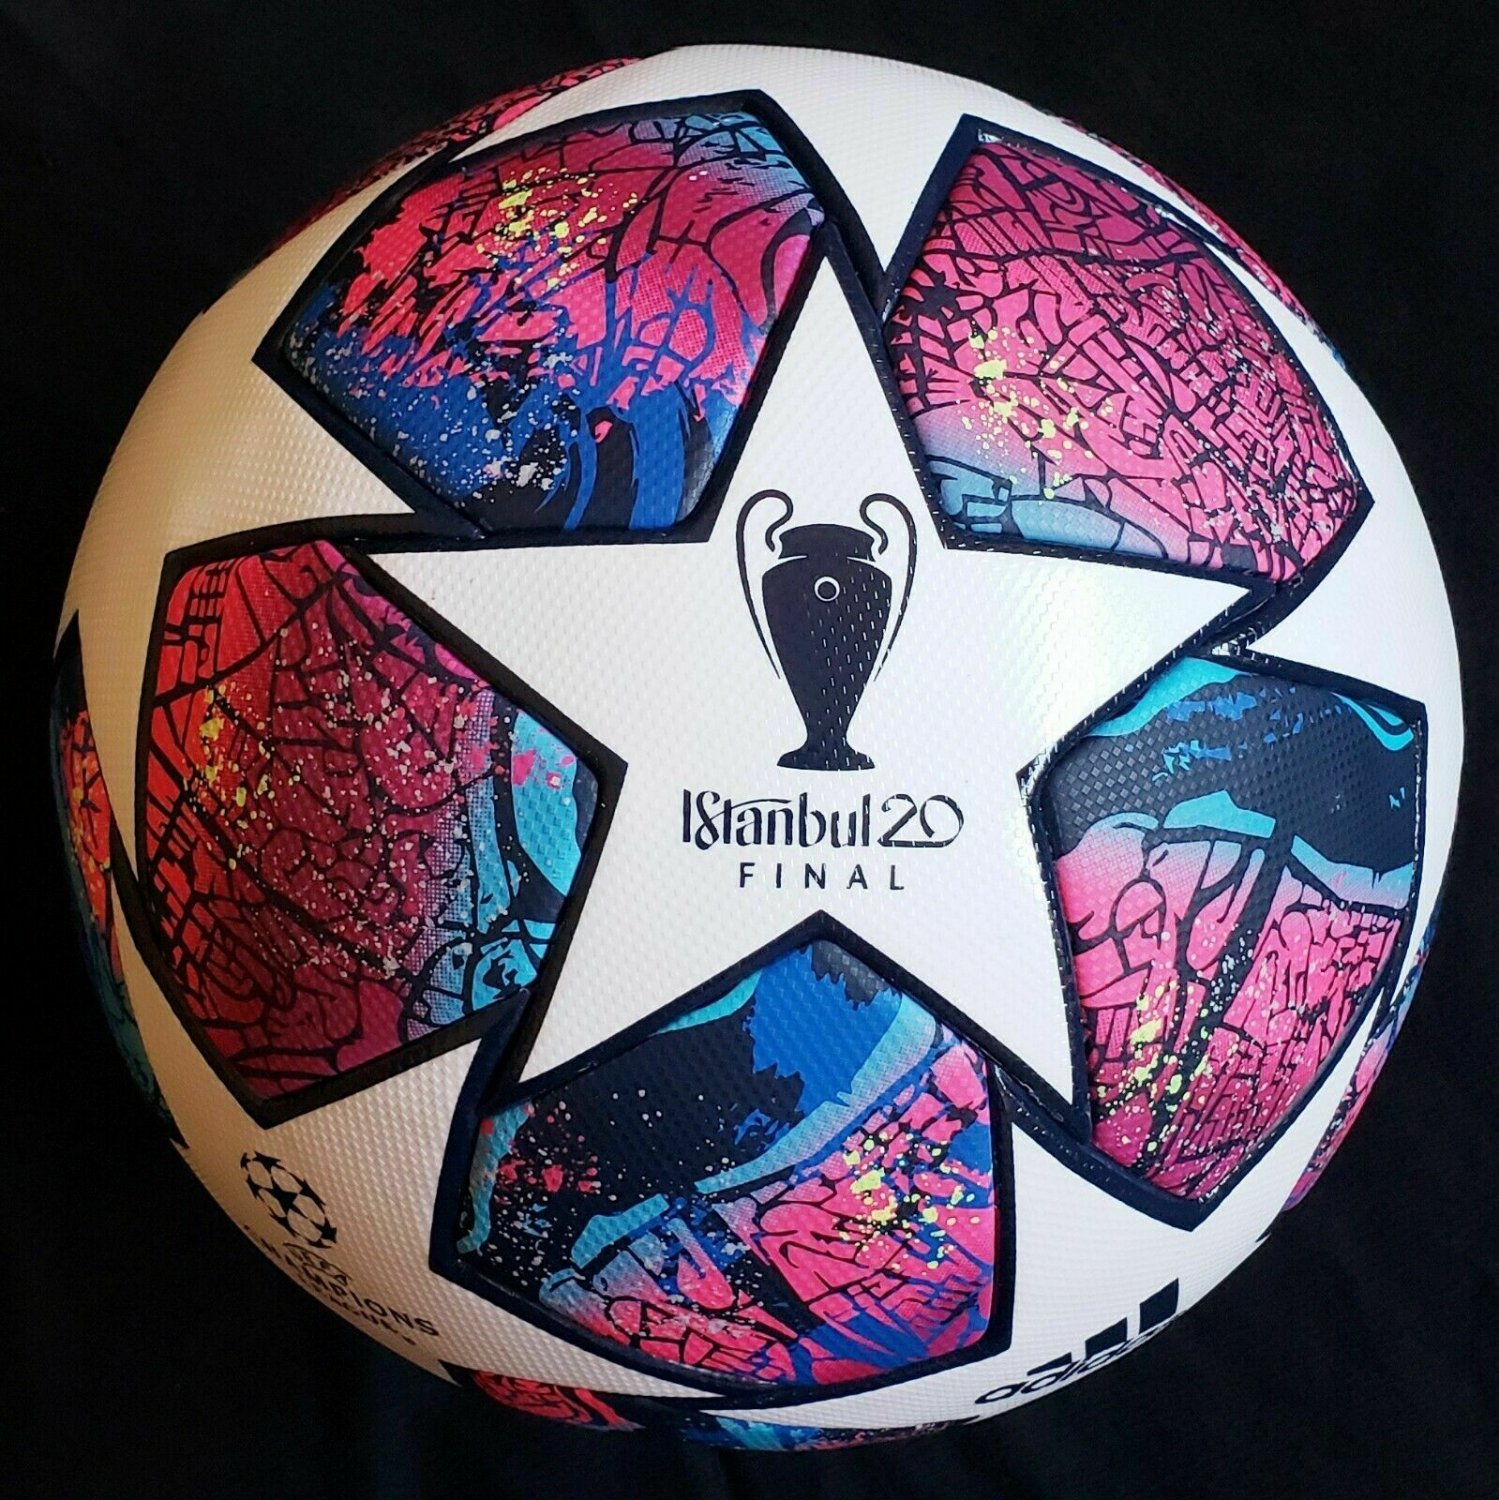 Adidas Champions League Final Istanbul 20 Official Match Ball SIZE 5